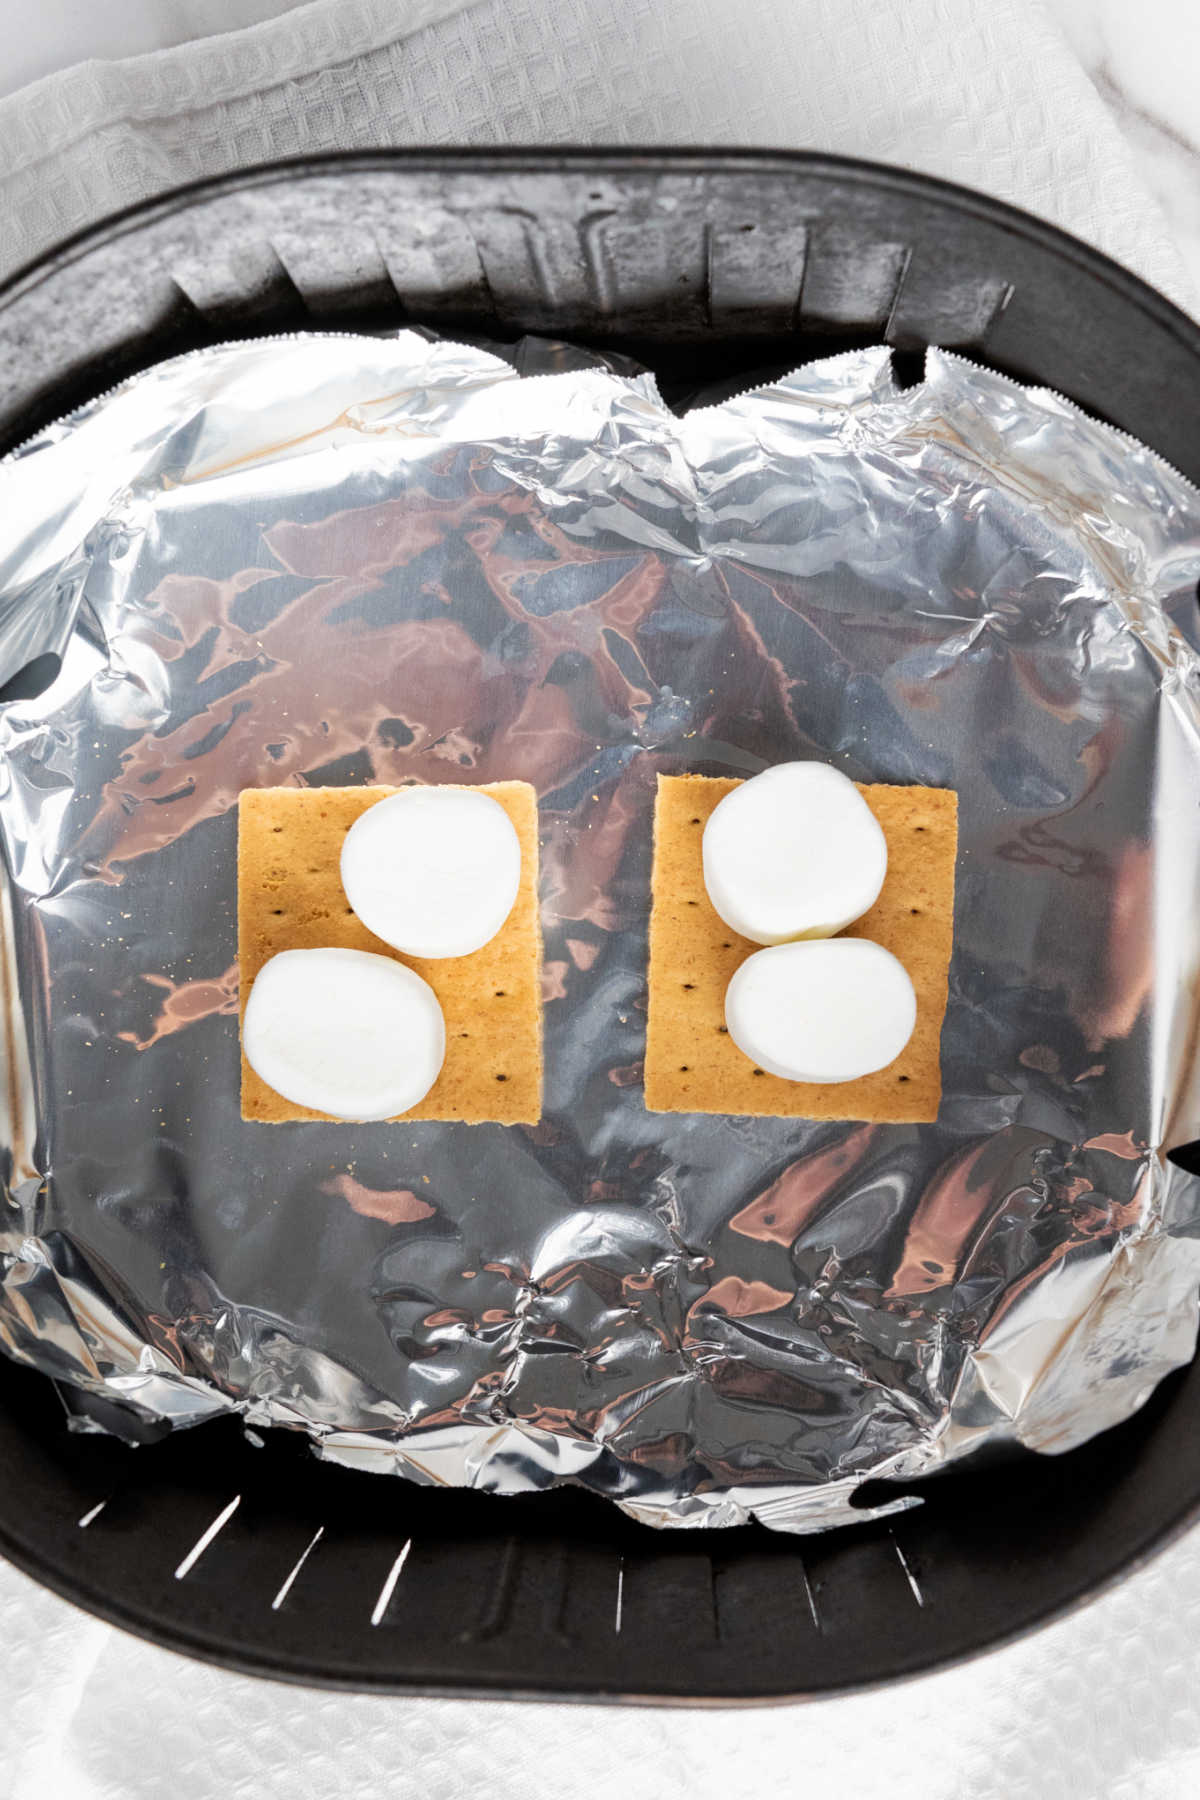 Graham crackers and marshmallows in foil lined air fryer basket.